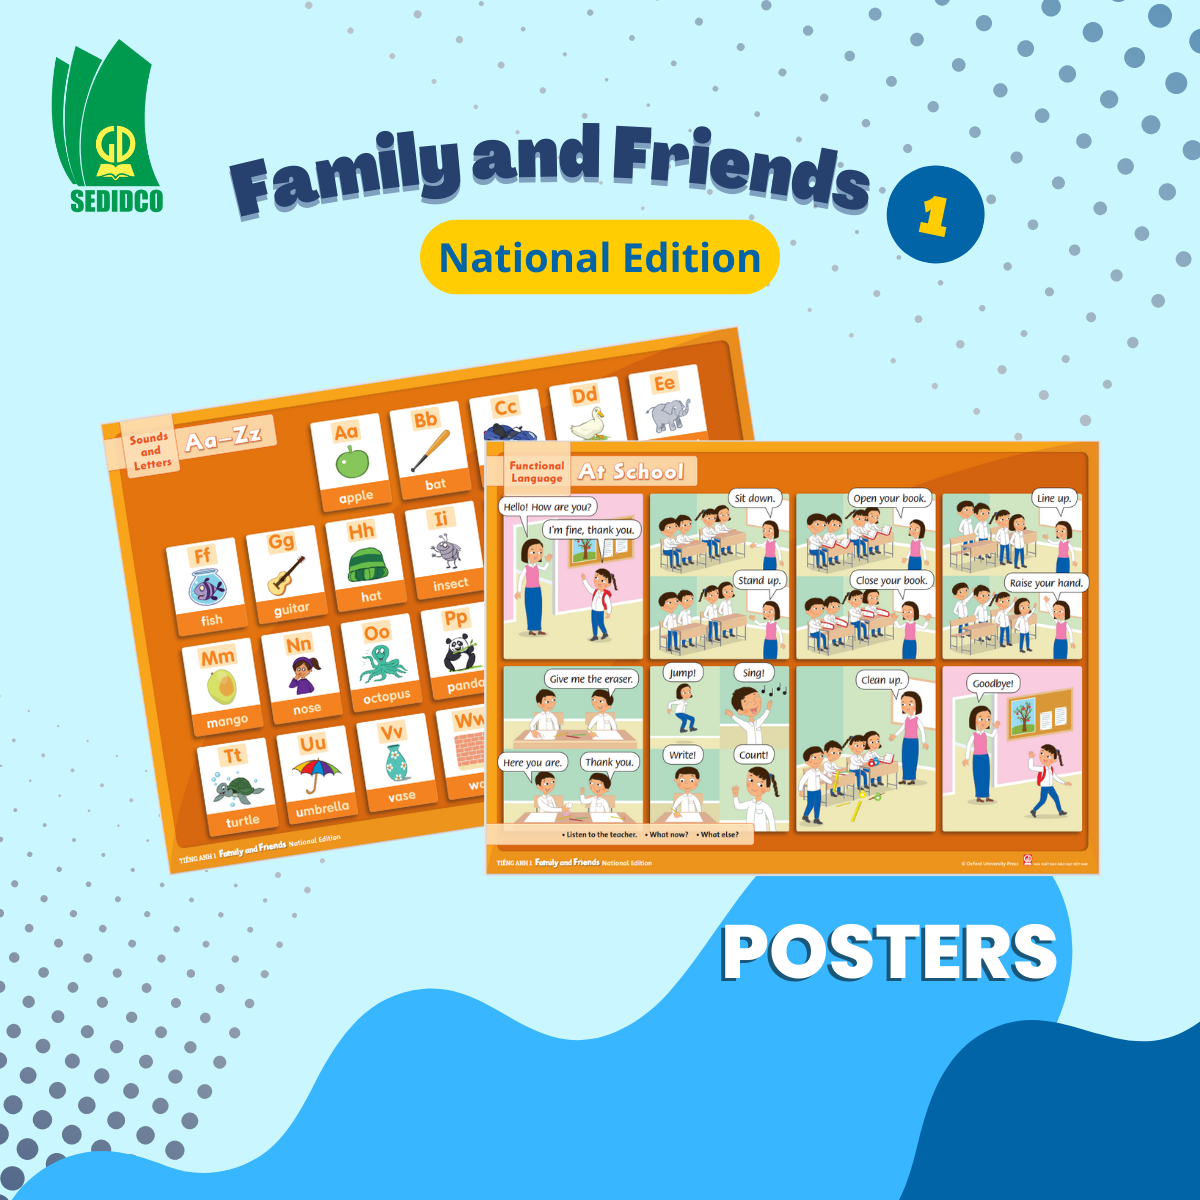  Posters - Tiếng Anh 1 Family and Friends National Edition 